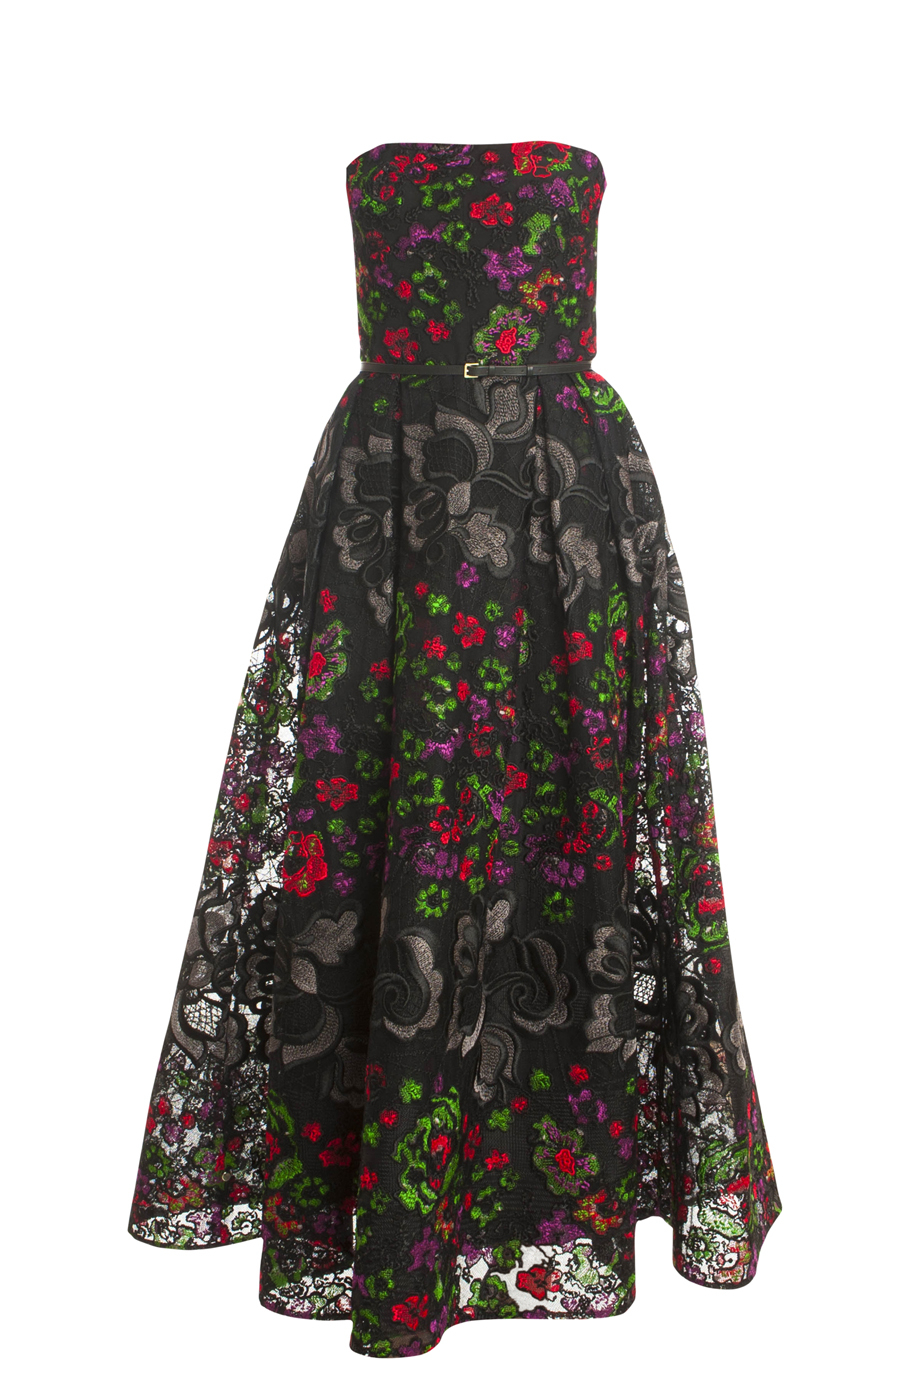 Lyst - Elie Saab Embroidered Floral Gown in Black